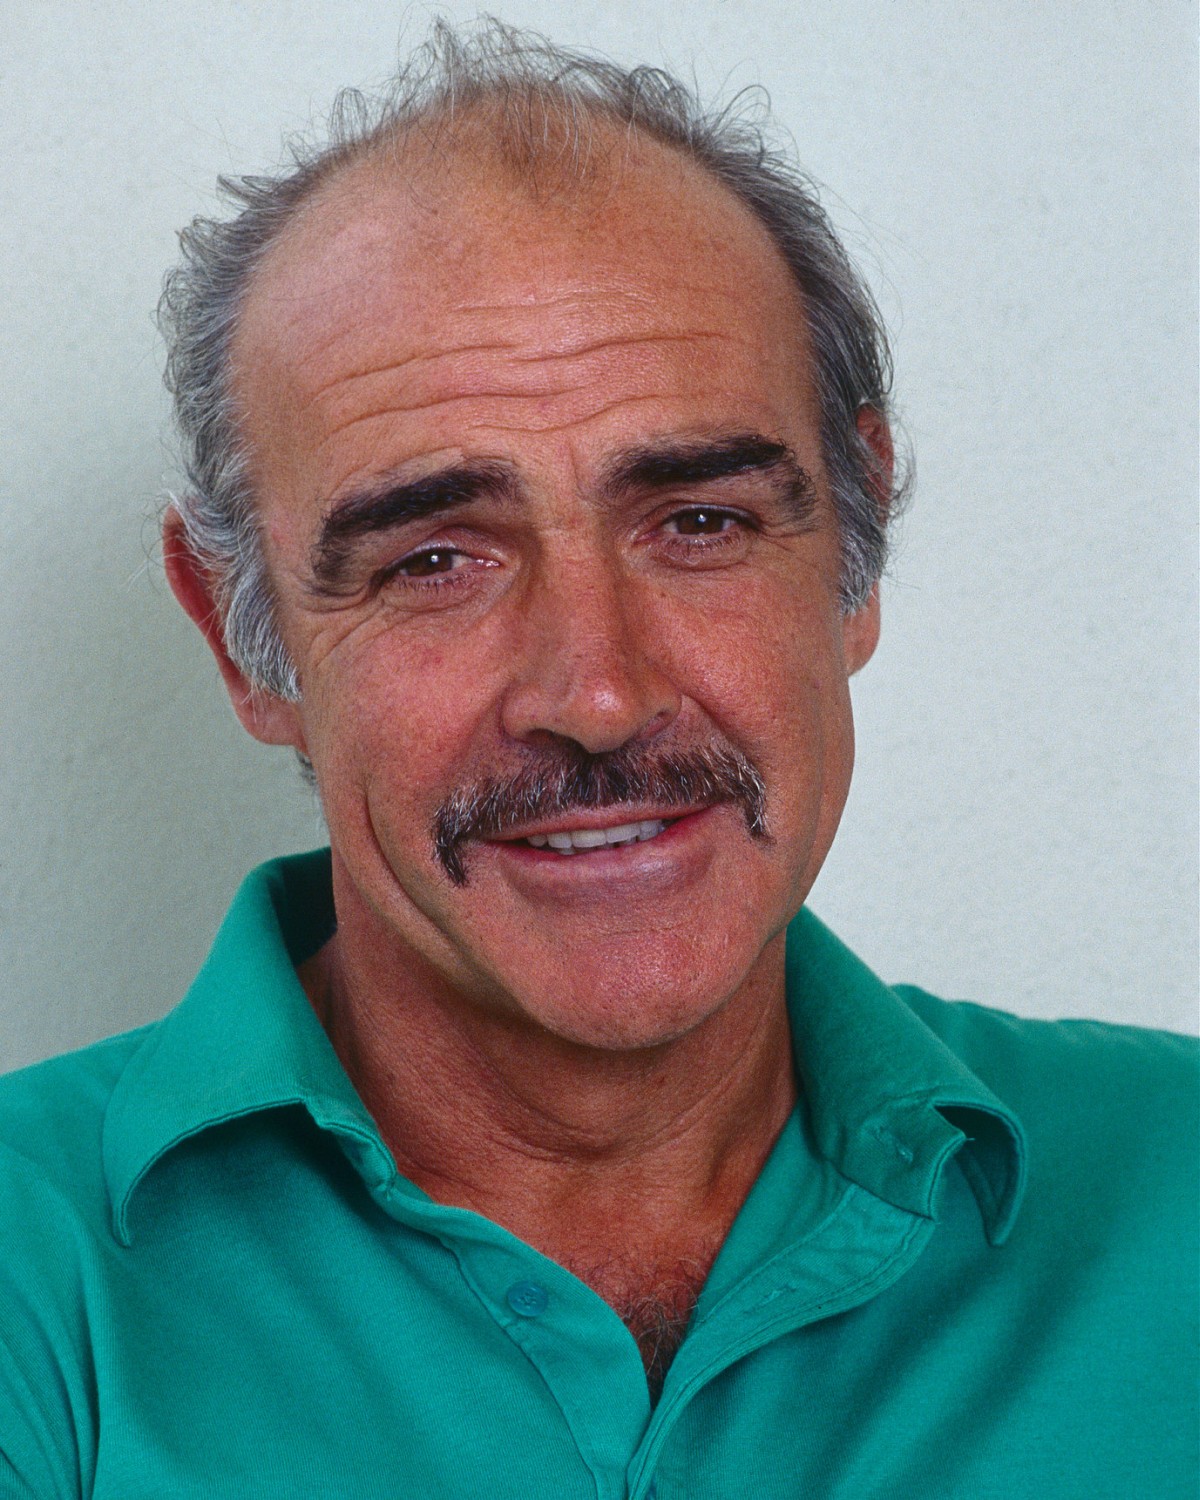 Sean Connery in 1989